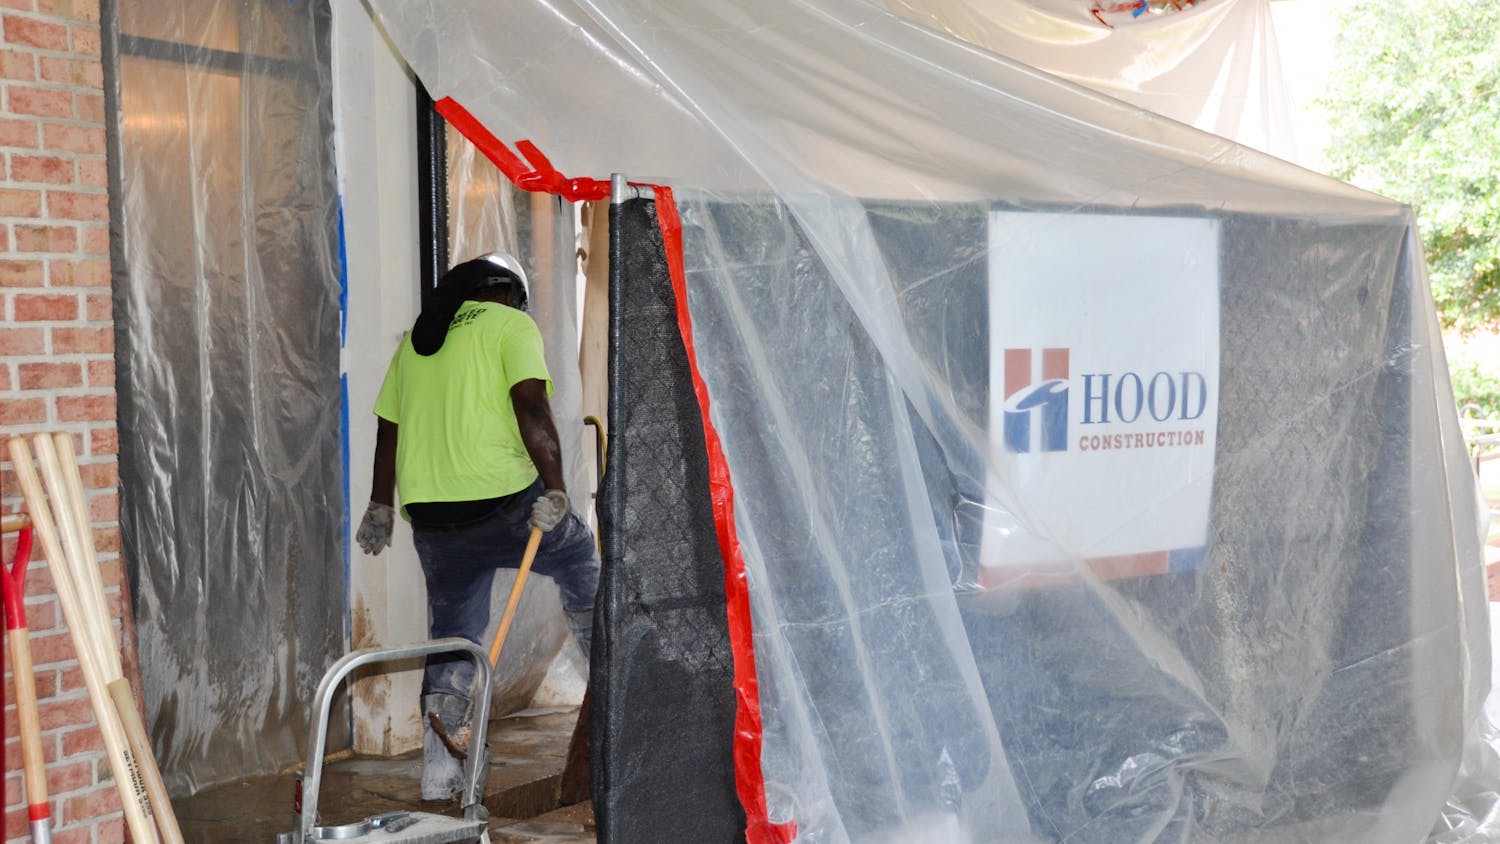 A person working on Russell House construction on June 7, 2022. Russell House is undergoing changes to their dining areas, including the addition of new dining hall.